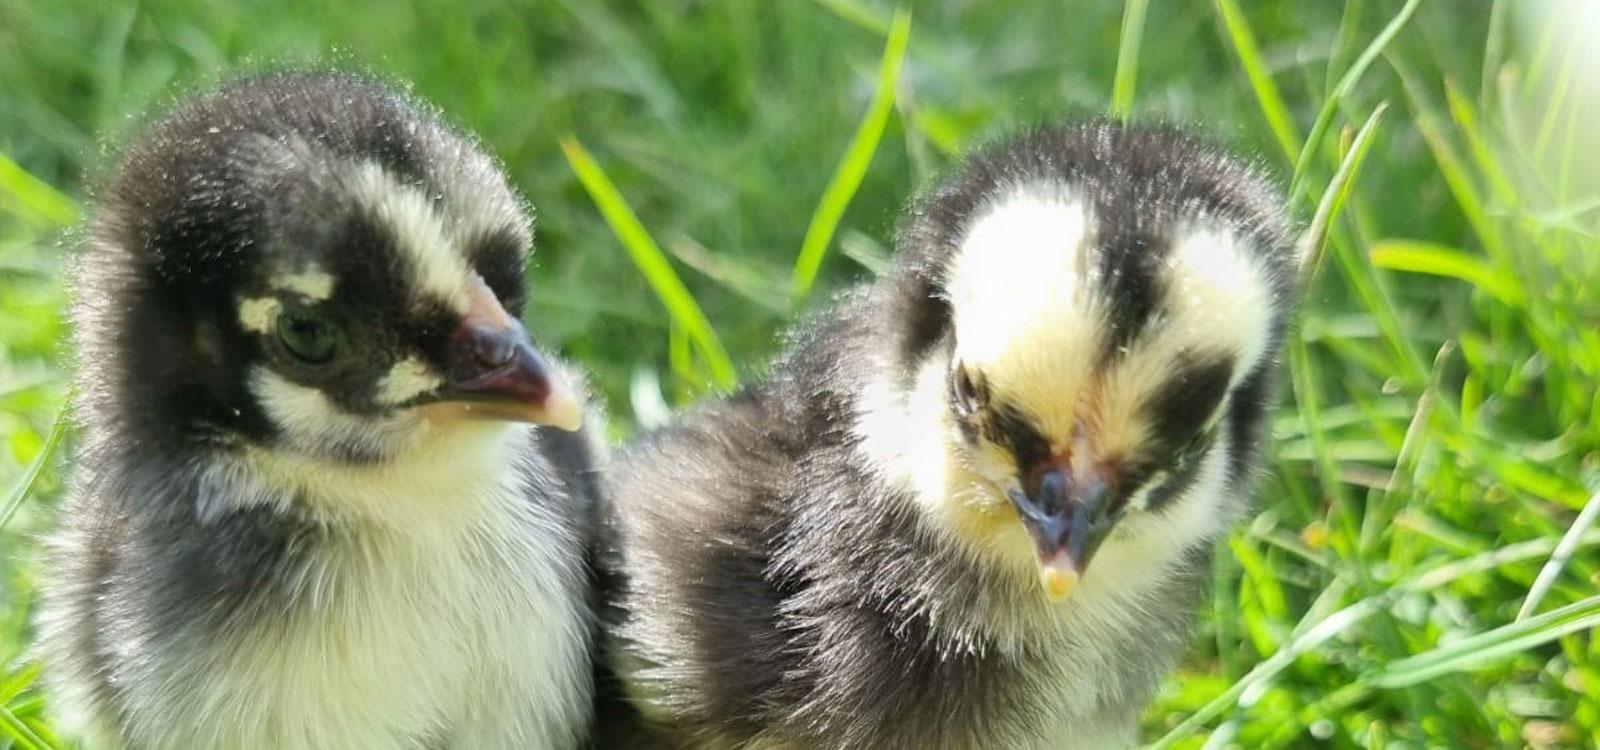 Close up of Chicks in the Grass